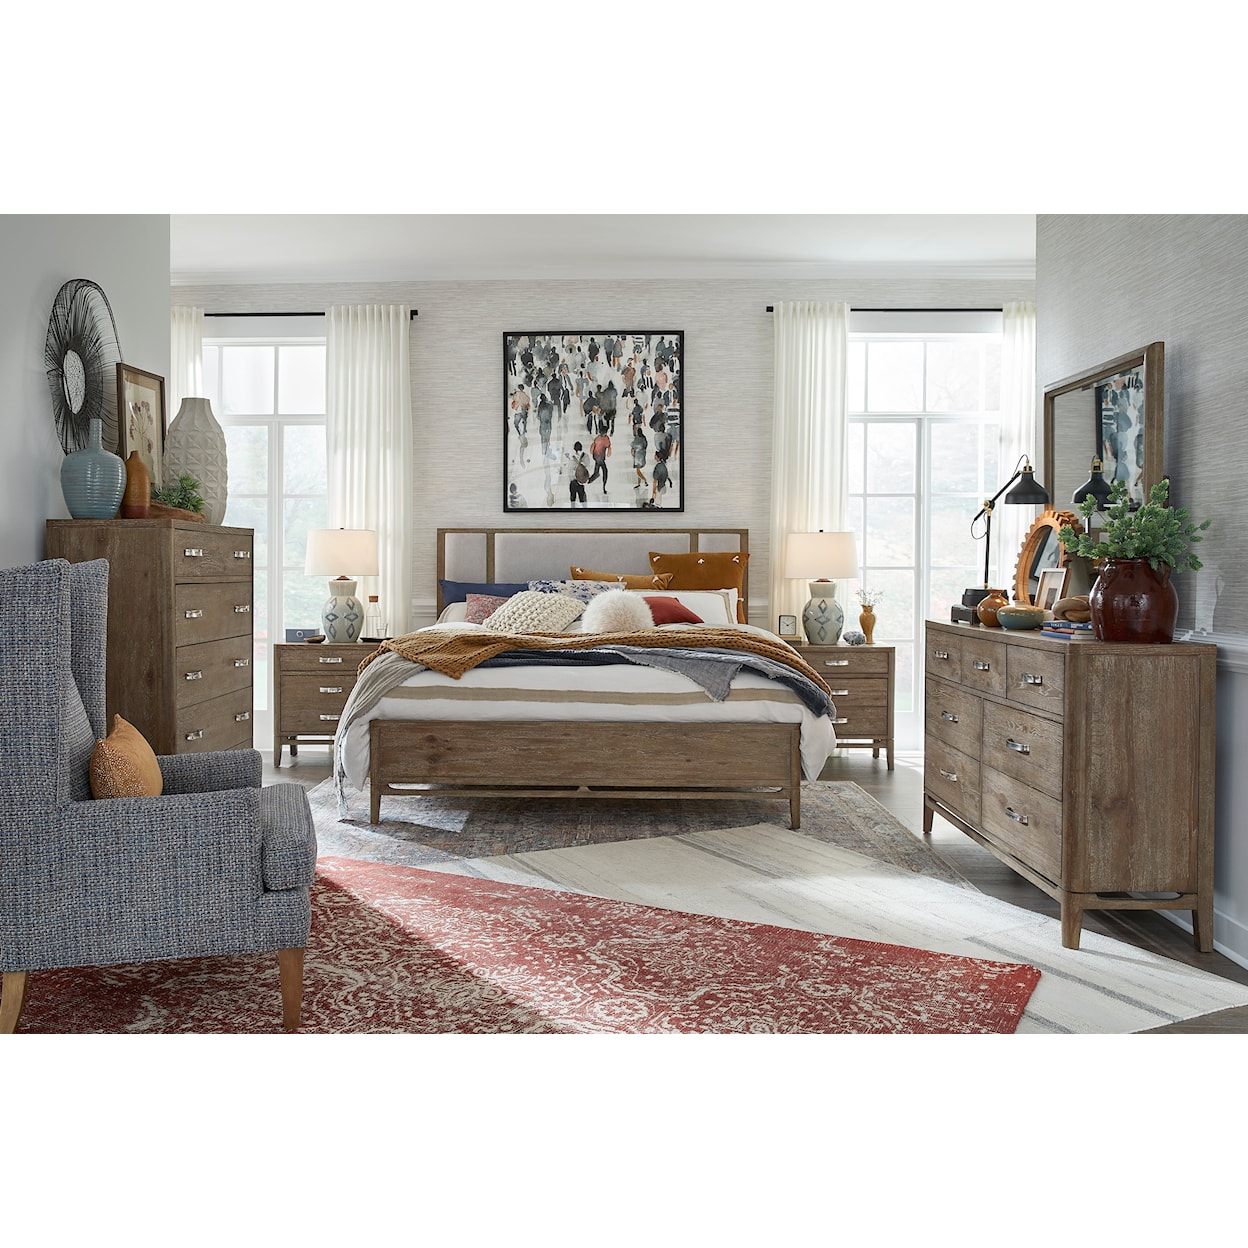 Magnussen Home Kavanaugh Bedroom Chest of Drawers